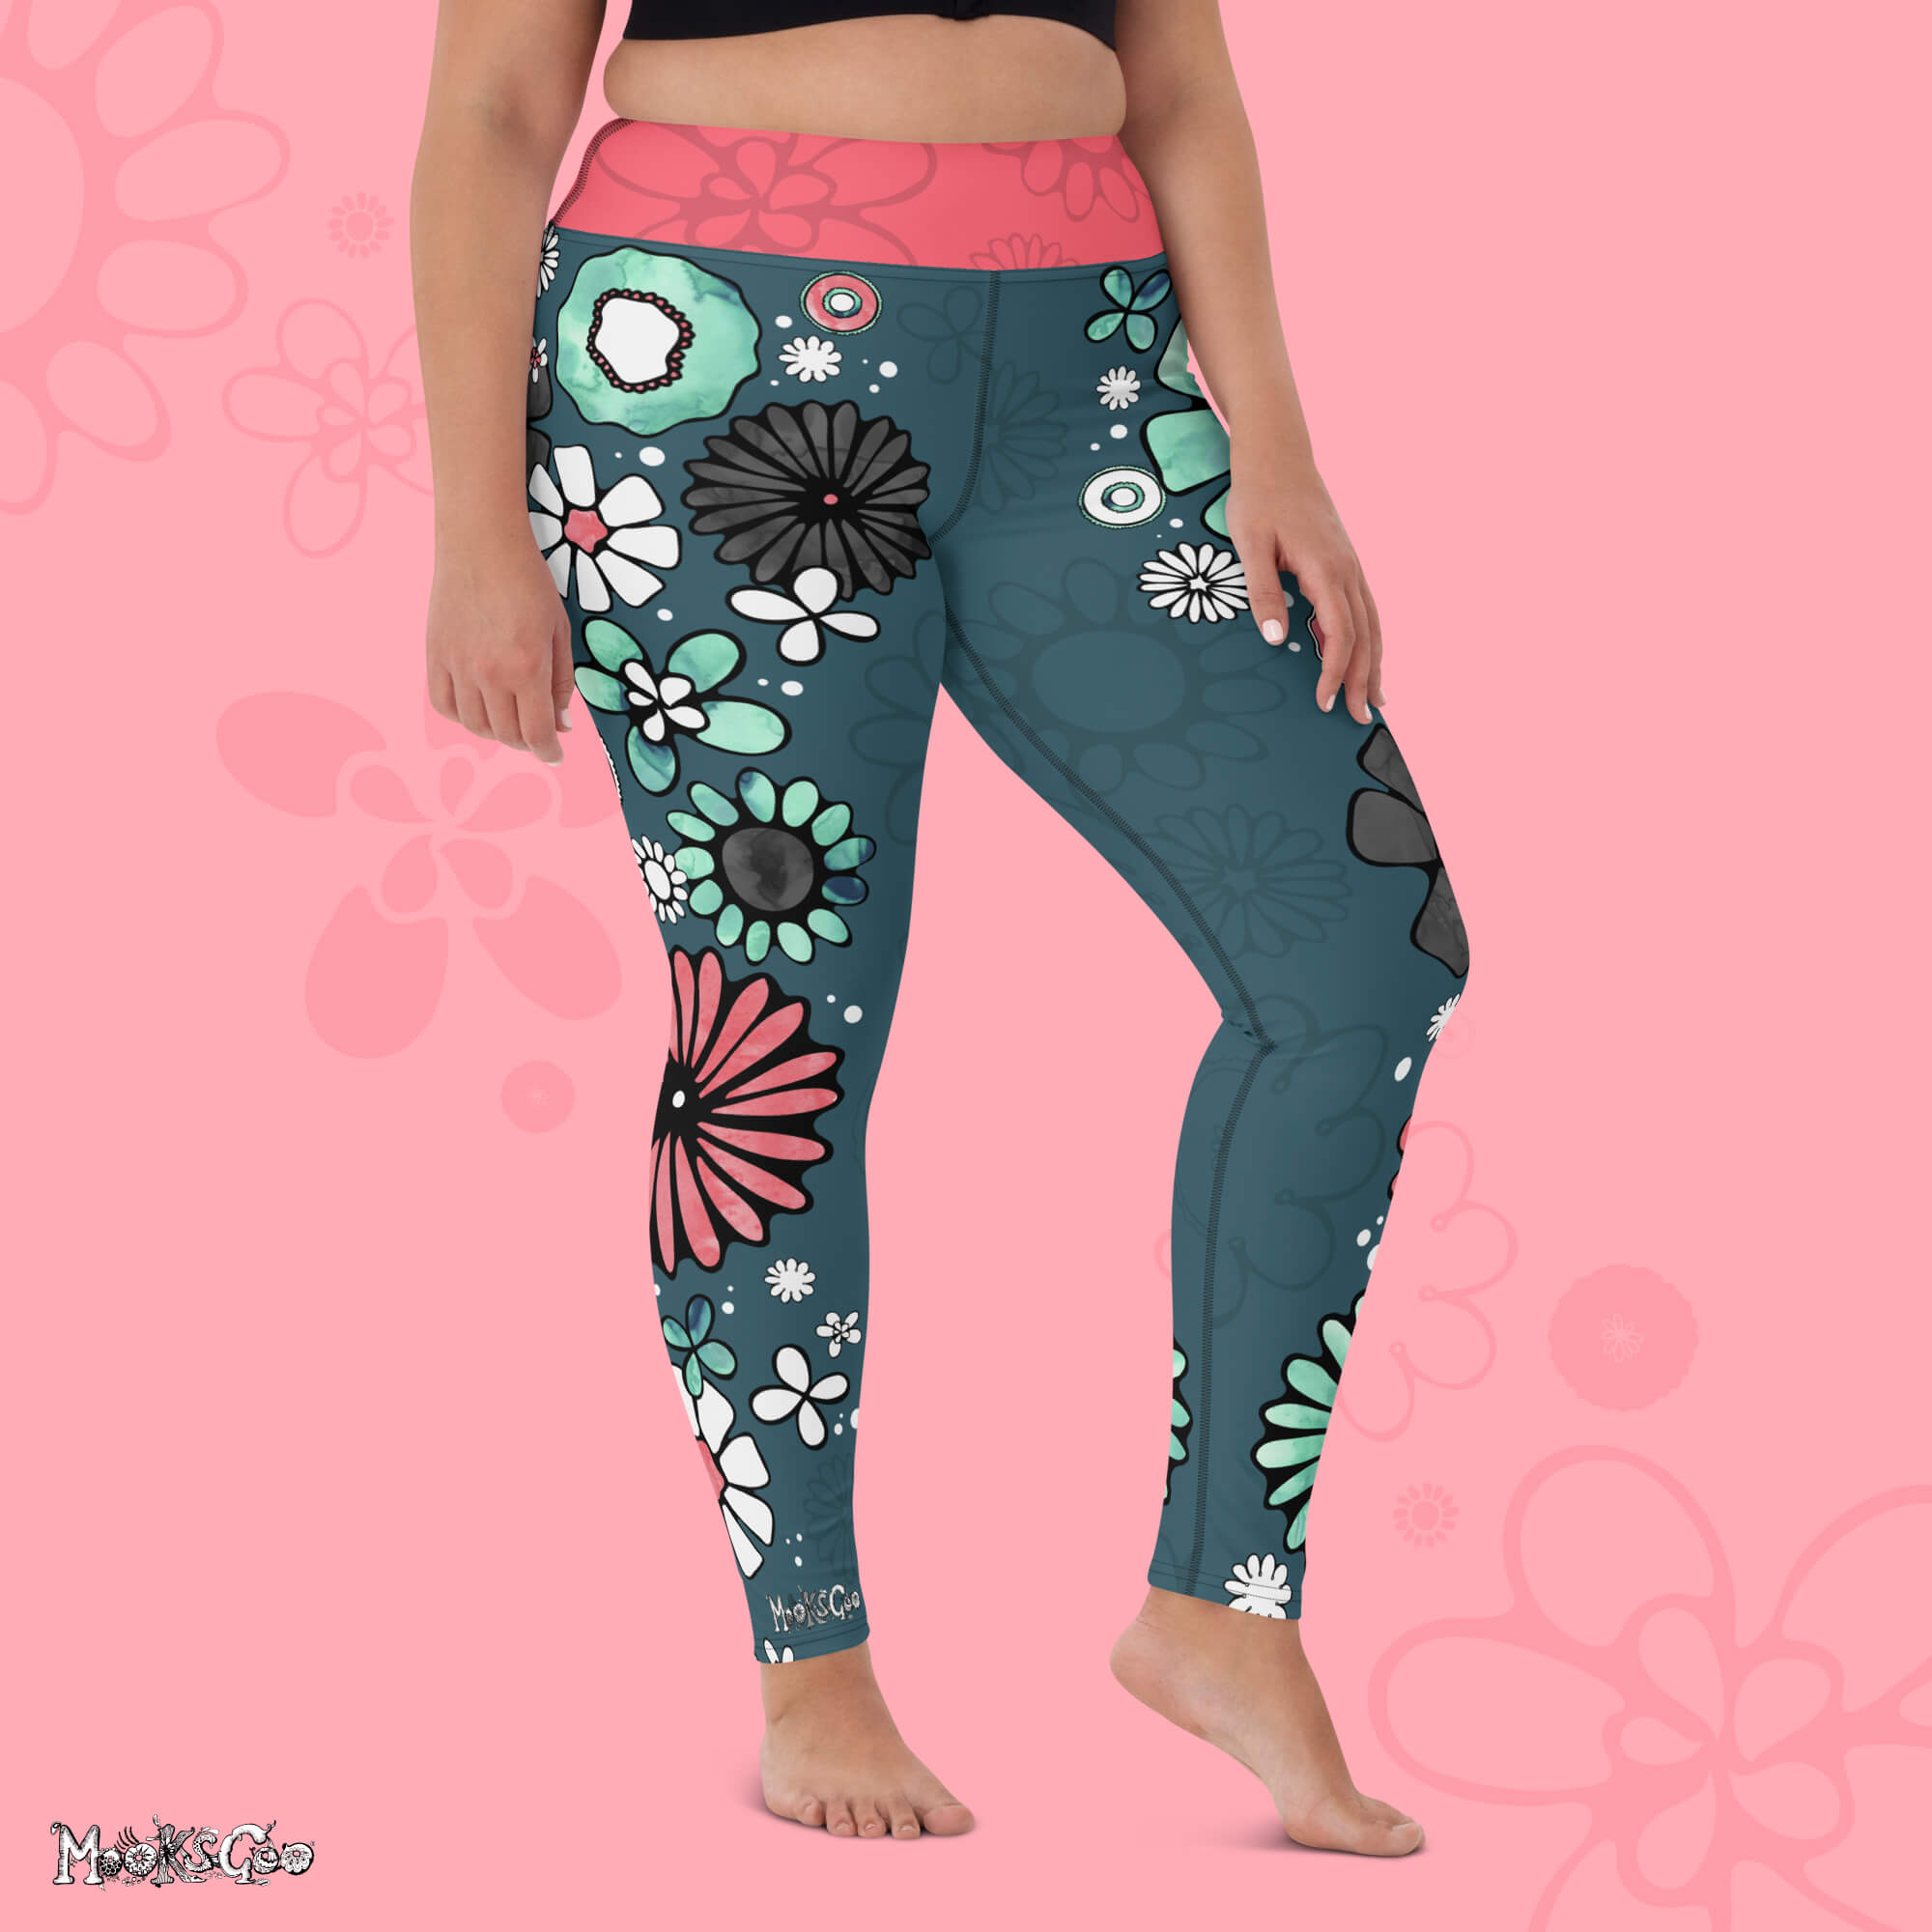 flower power funky yoga workout leggings mooksgoo model legs right front xl b71ad016 b019 4c79 9885 5793d065aed4